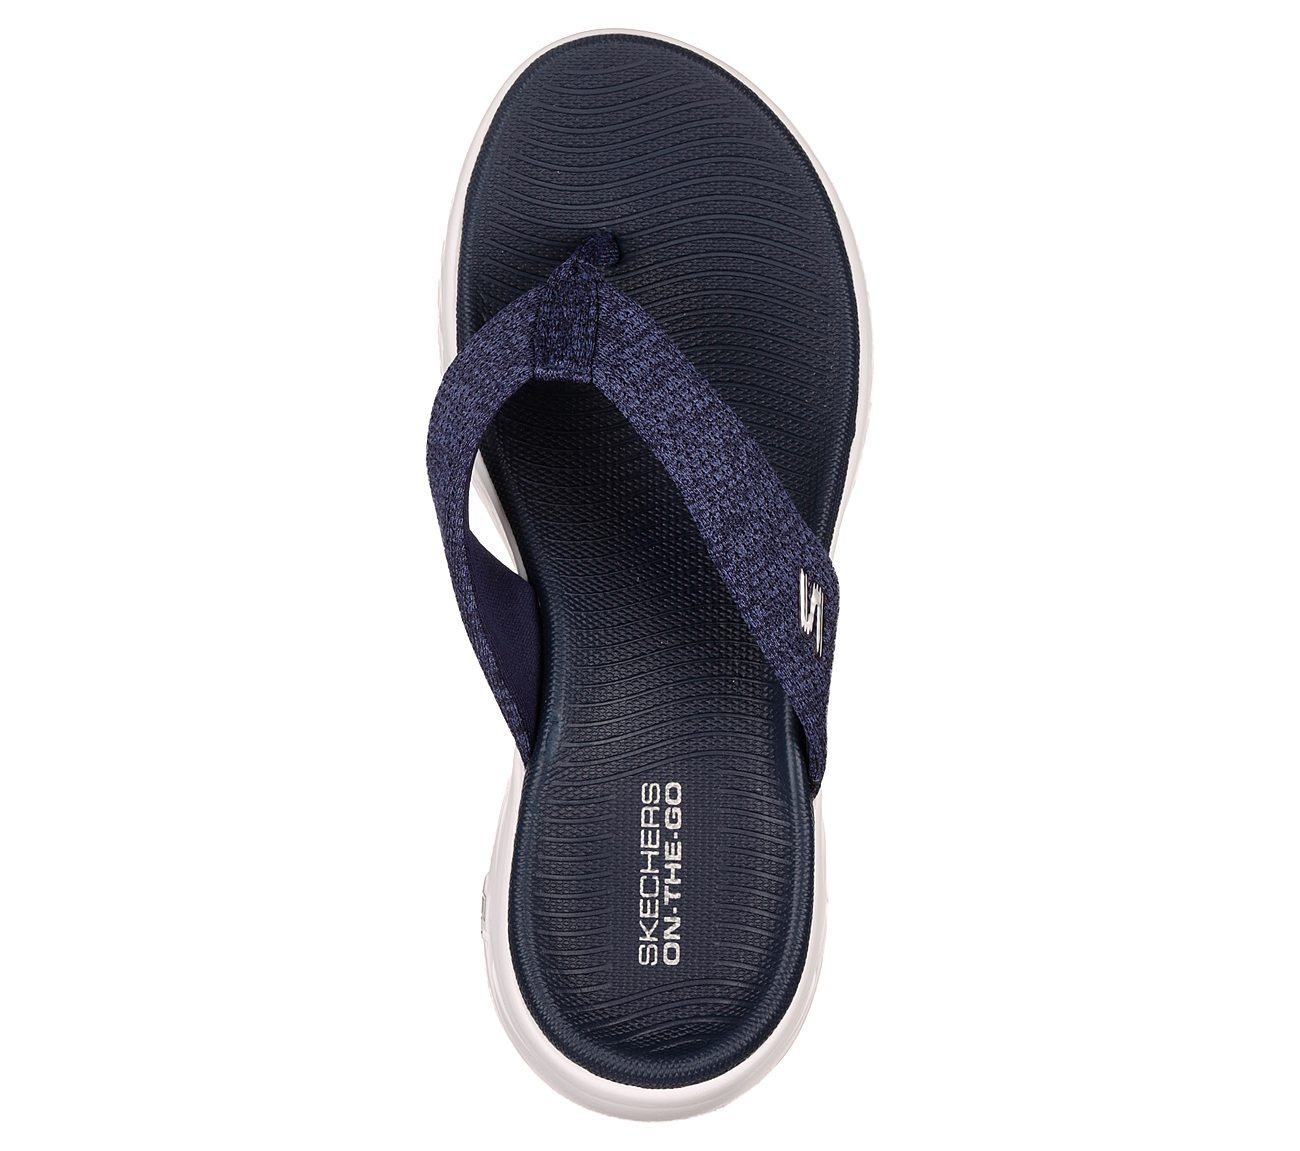 ON-THE-GO 600 - PREFERRED, NAVY/WHITE Footwear Top View